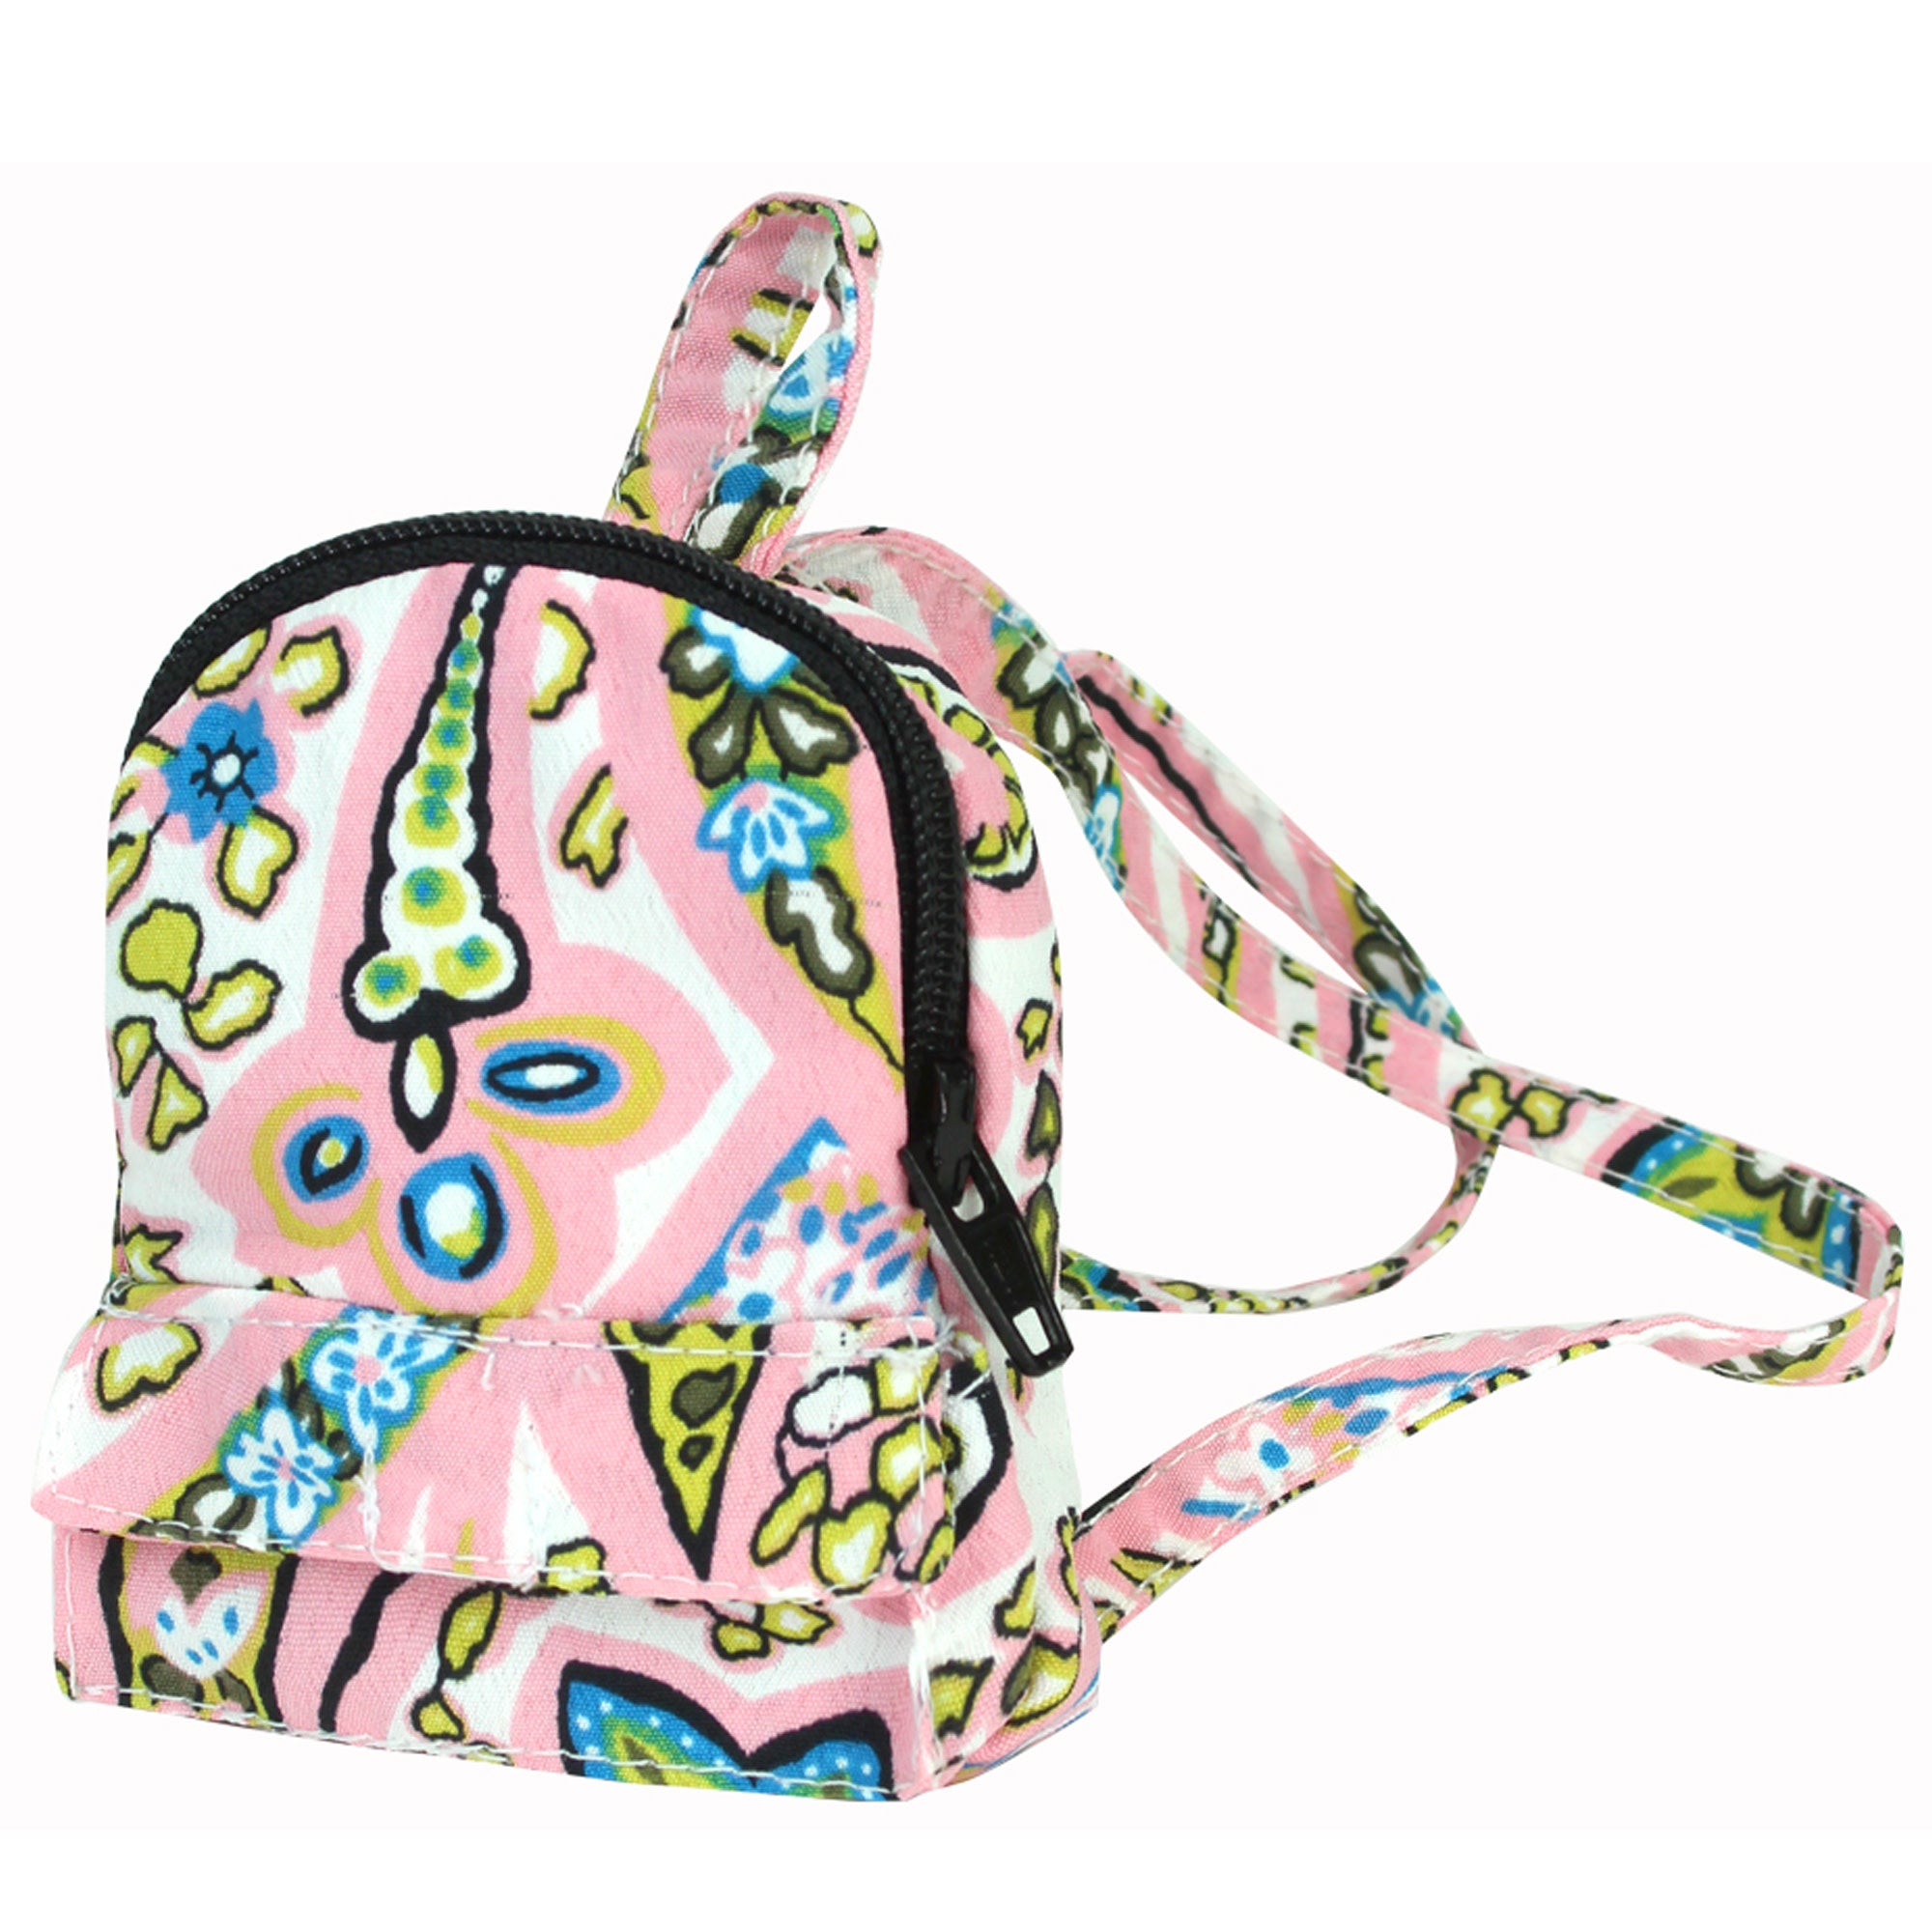 Sophia’s Paisley Mini-Backpack with Zipper, Peplum Ruffle Detail, & Front Pocket for 18” Dolls, Pink